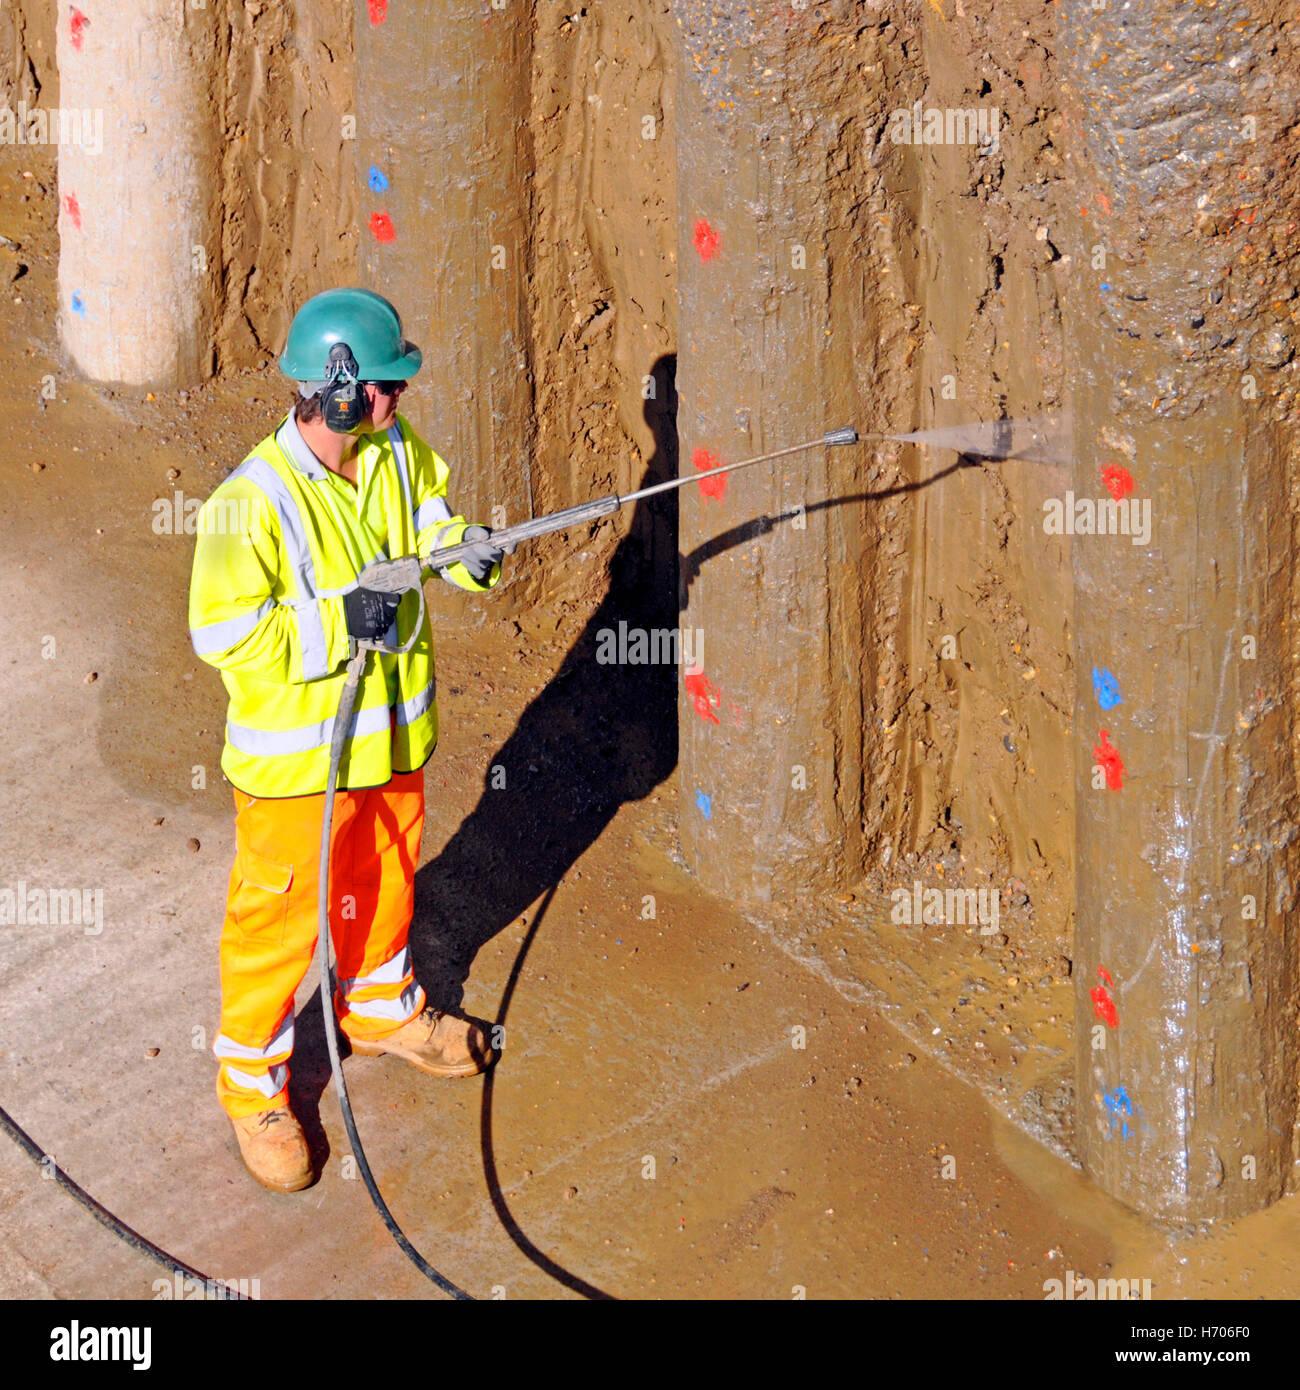 Retaining wall on building construction site worker high pressure water jet clean clay off new concrete piles M25 motorway widening Essex England UK Stock Photo